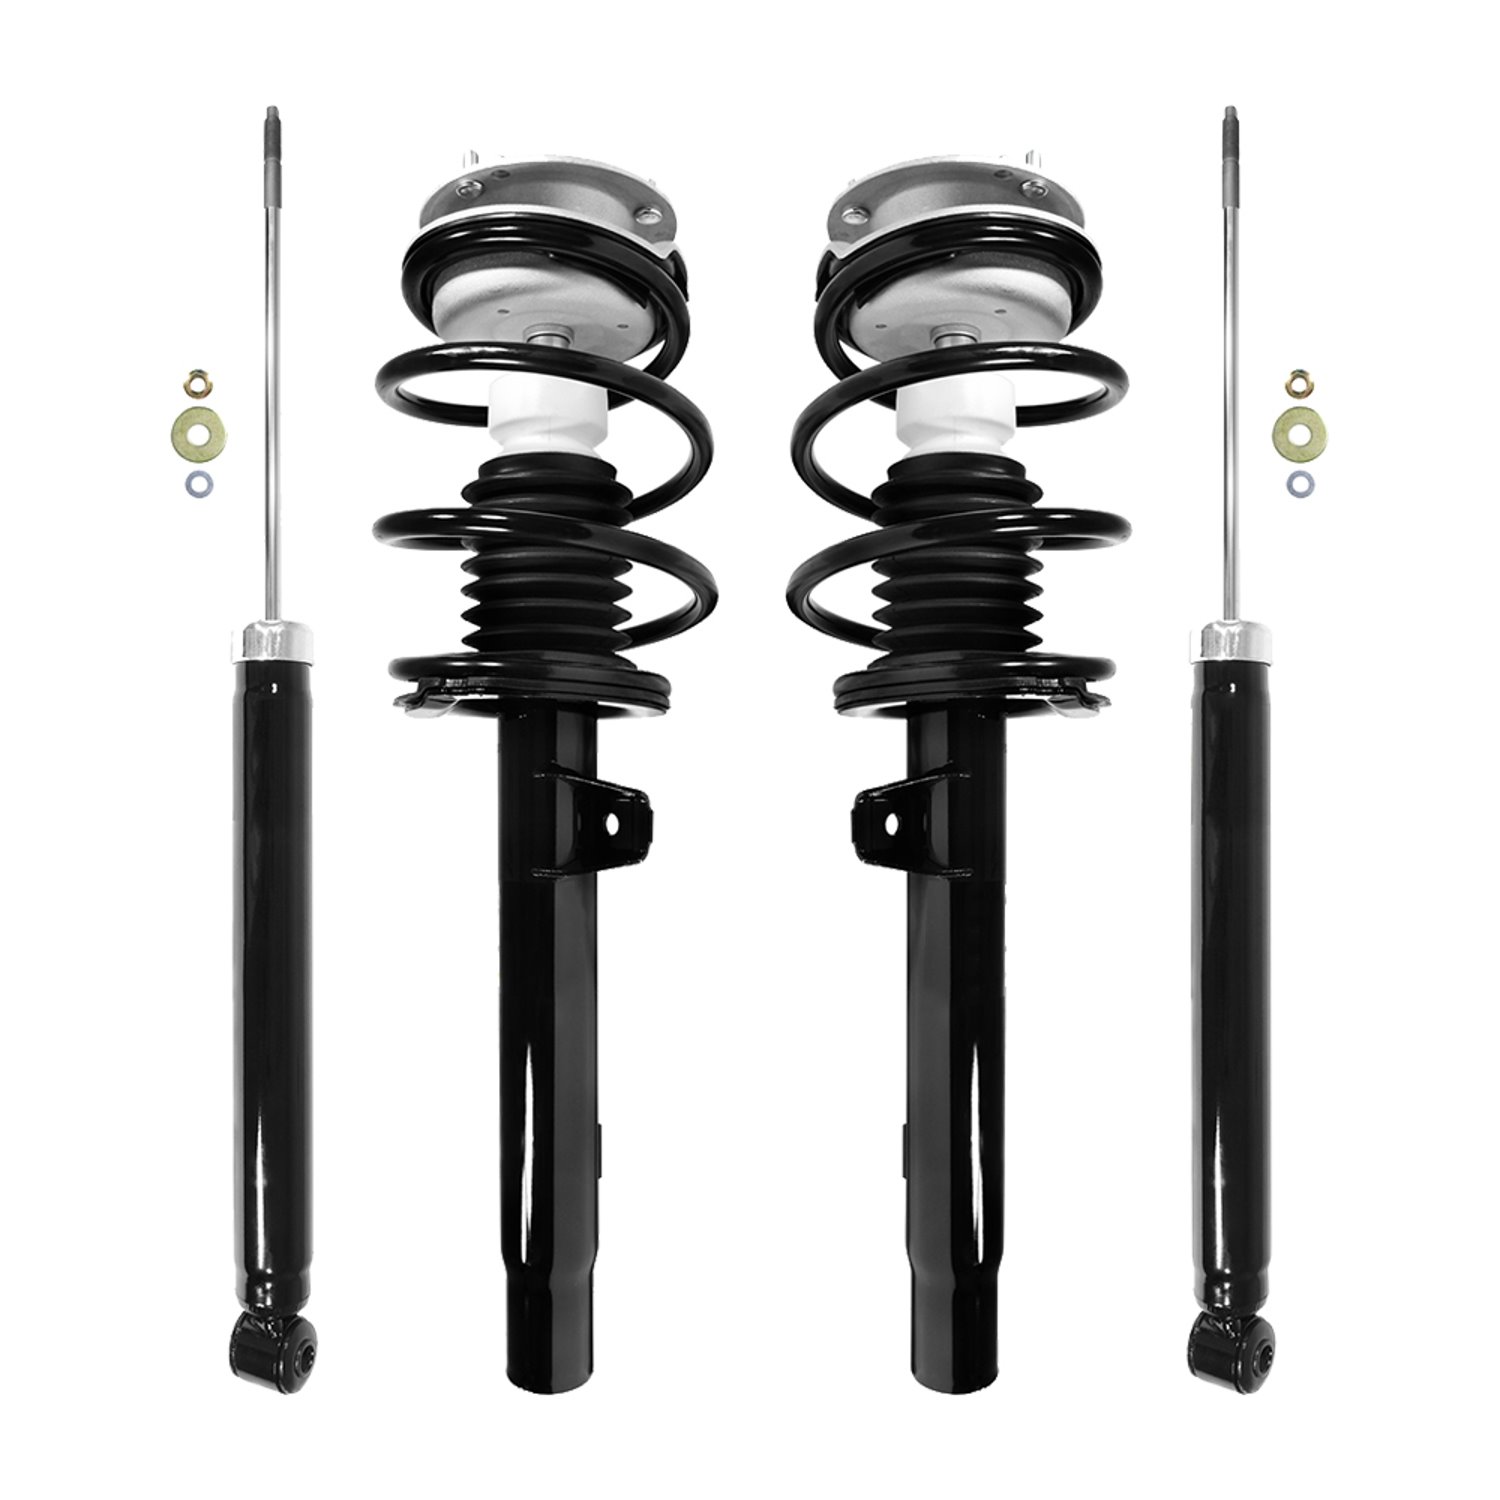 4-11371-259030-001 Front & Rear Suspension Strut & Coil Spring Assembly Fits Select BMW